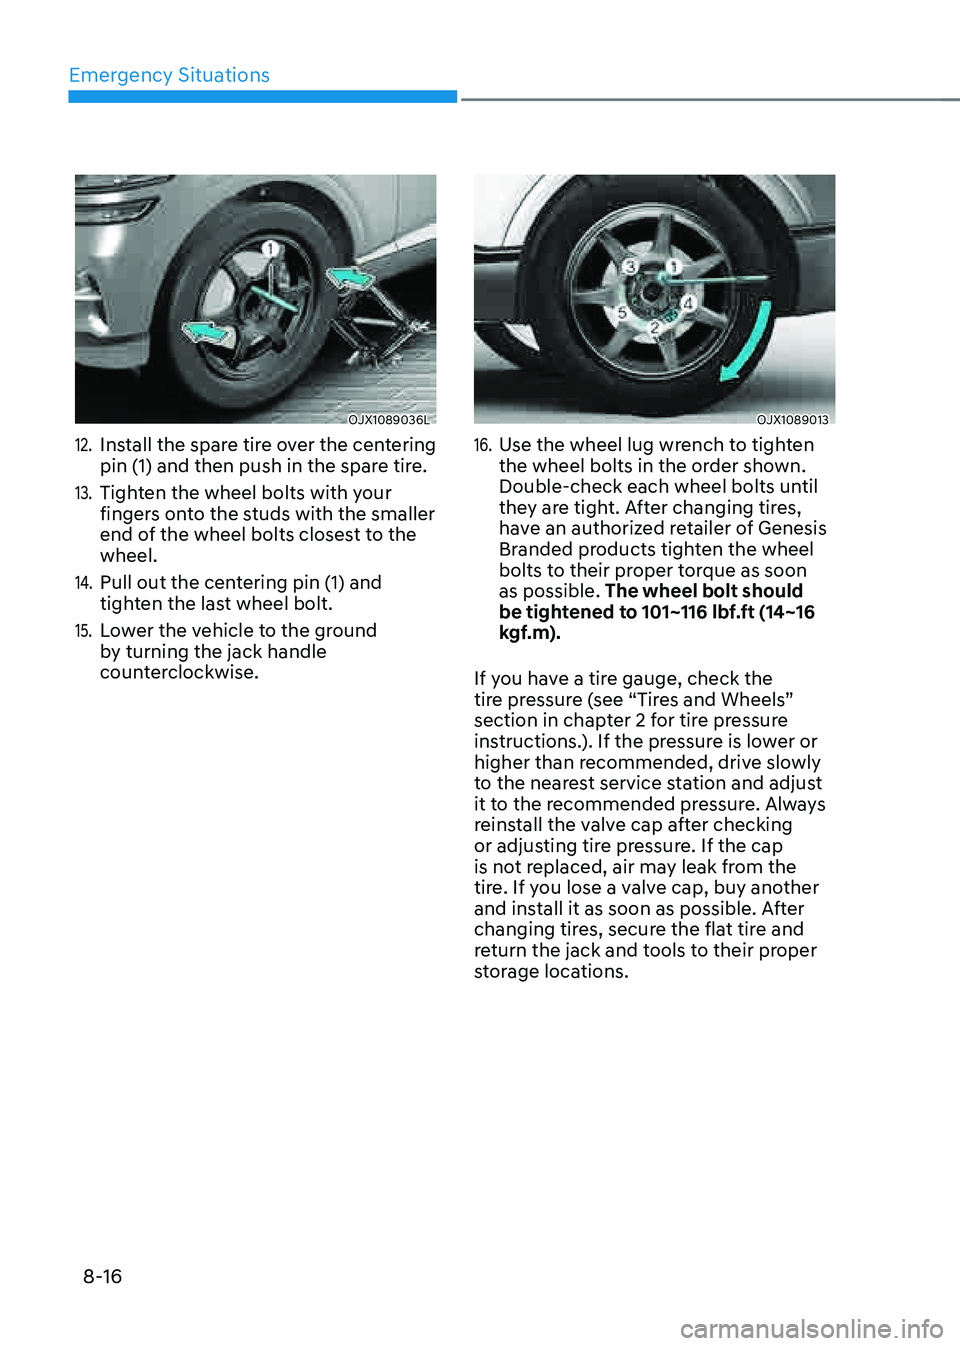 GENESIS GV80 2021  Owners Manual Emergency Situations
8-16
OJX1089036LOJX1089036L
12. Install the spare tire over the centering 
pin (1) and then push in the spare tire. 
13. Tighten the wheel bolts with your 
fingers onto the studs 